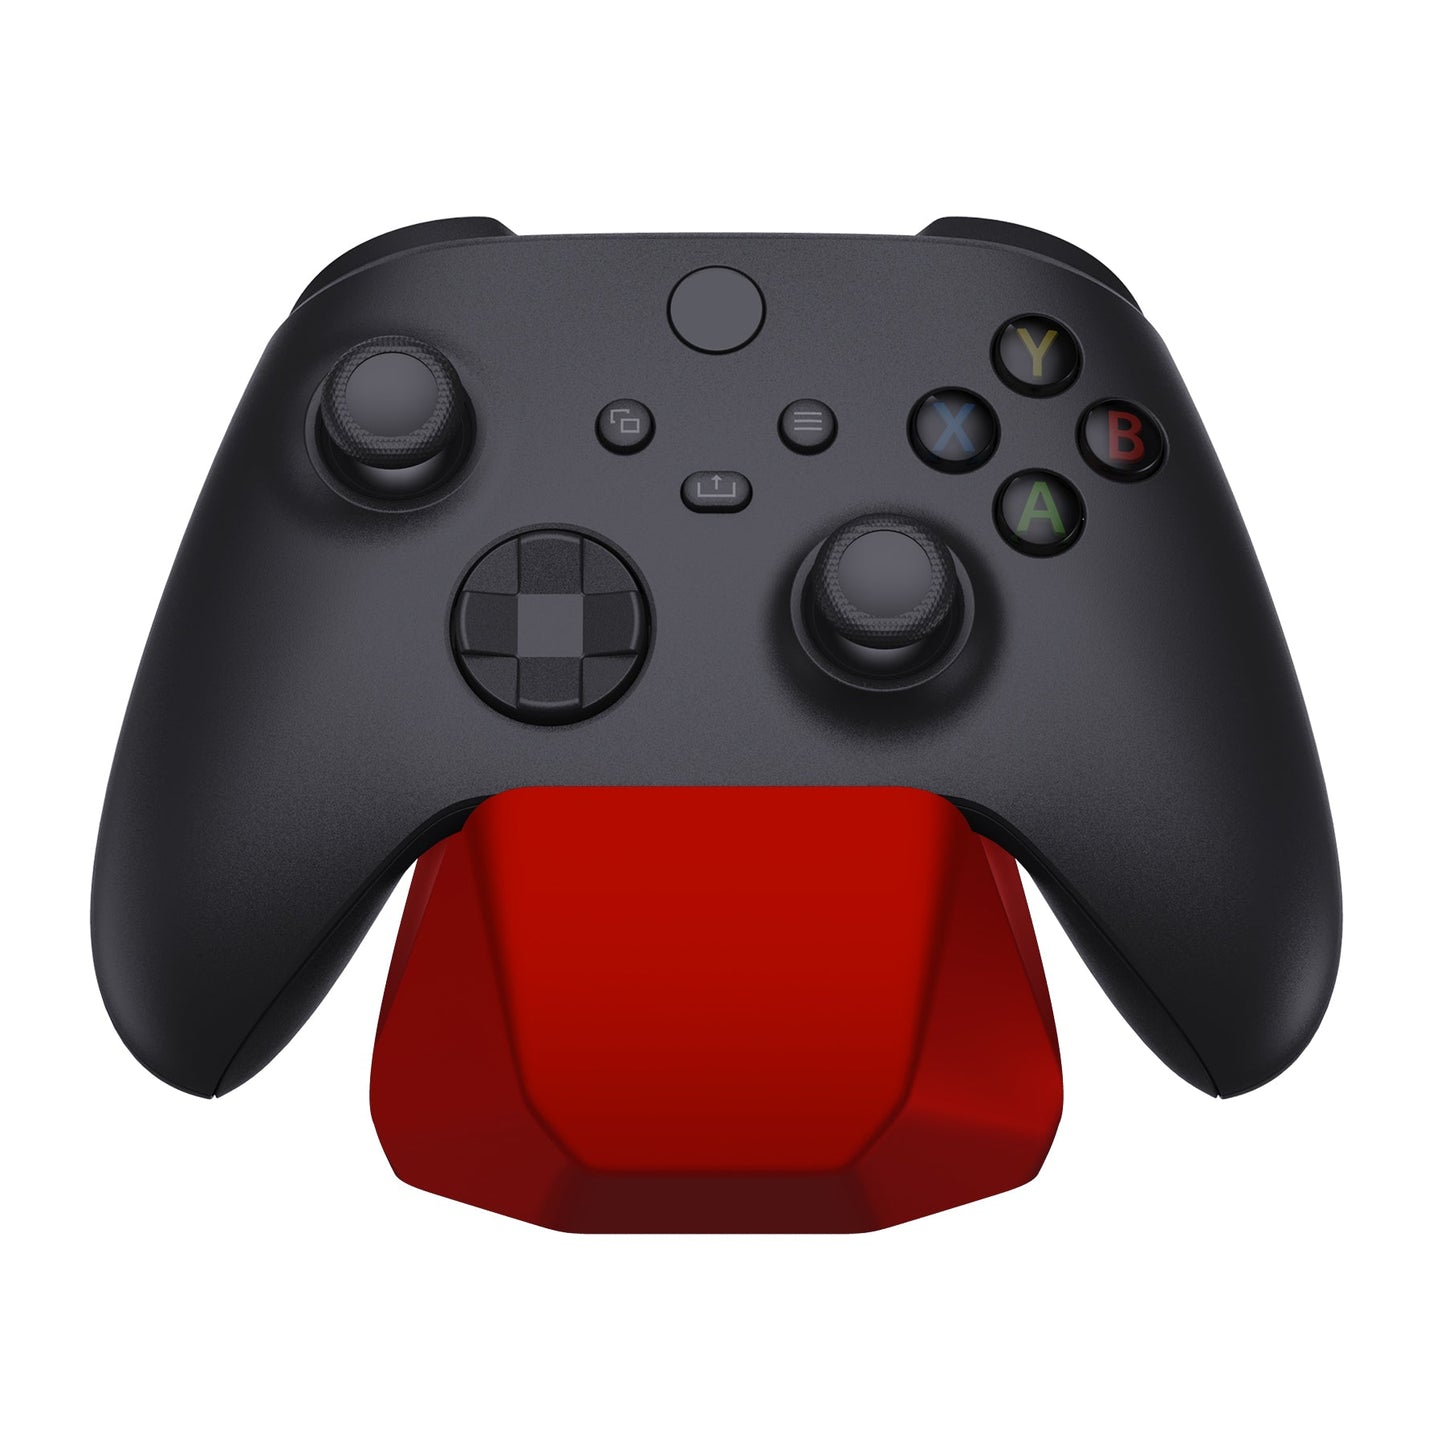 PlayVital Scarlet Red Universal Game Controller Stand for Xbox Series X/S Controller, Gamepad Stand for PS5/4 Controller, Display Stand Holder for Xbox Controller - PFPJ057 PlayVital